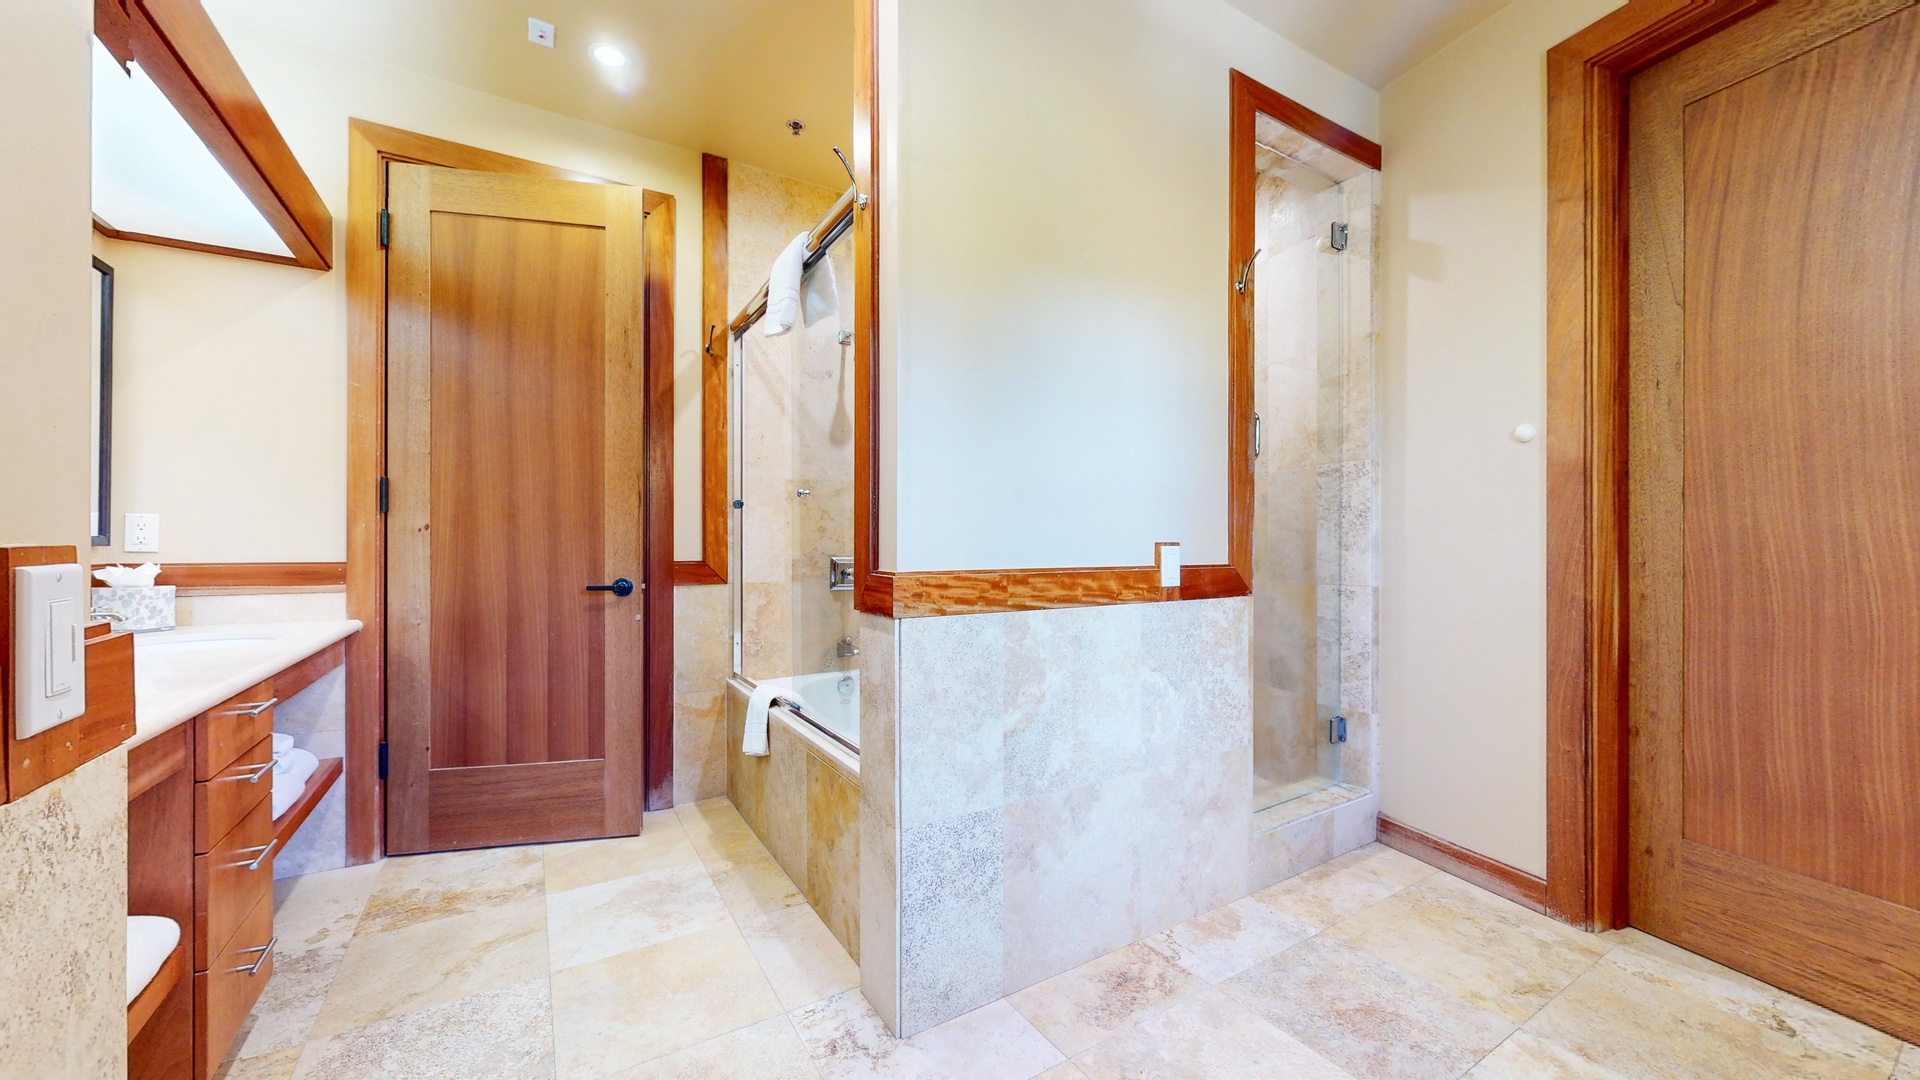 Bathroom 1 en-suite with jacuzzi tub, and separate stand up shower